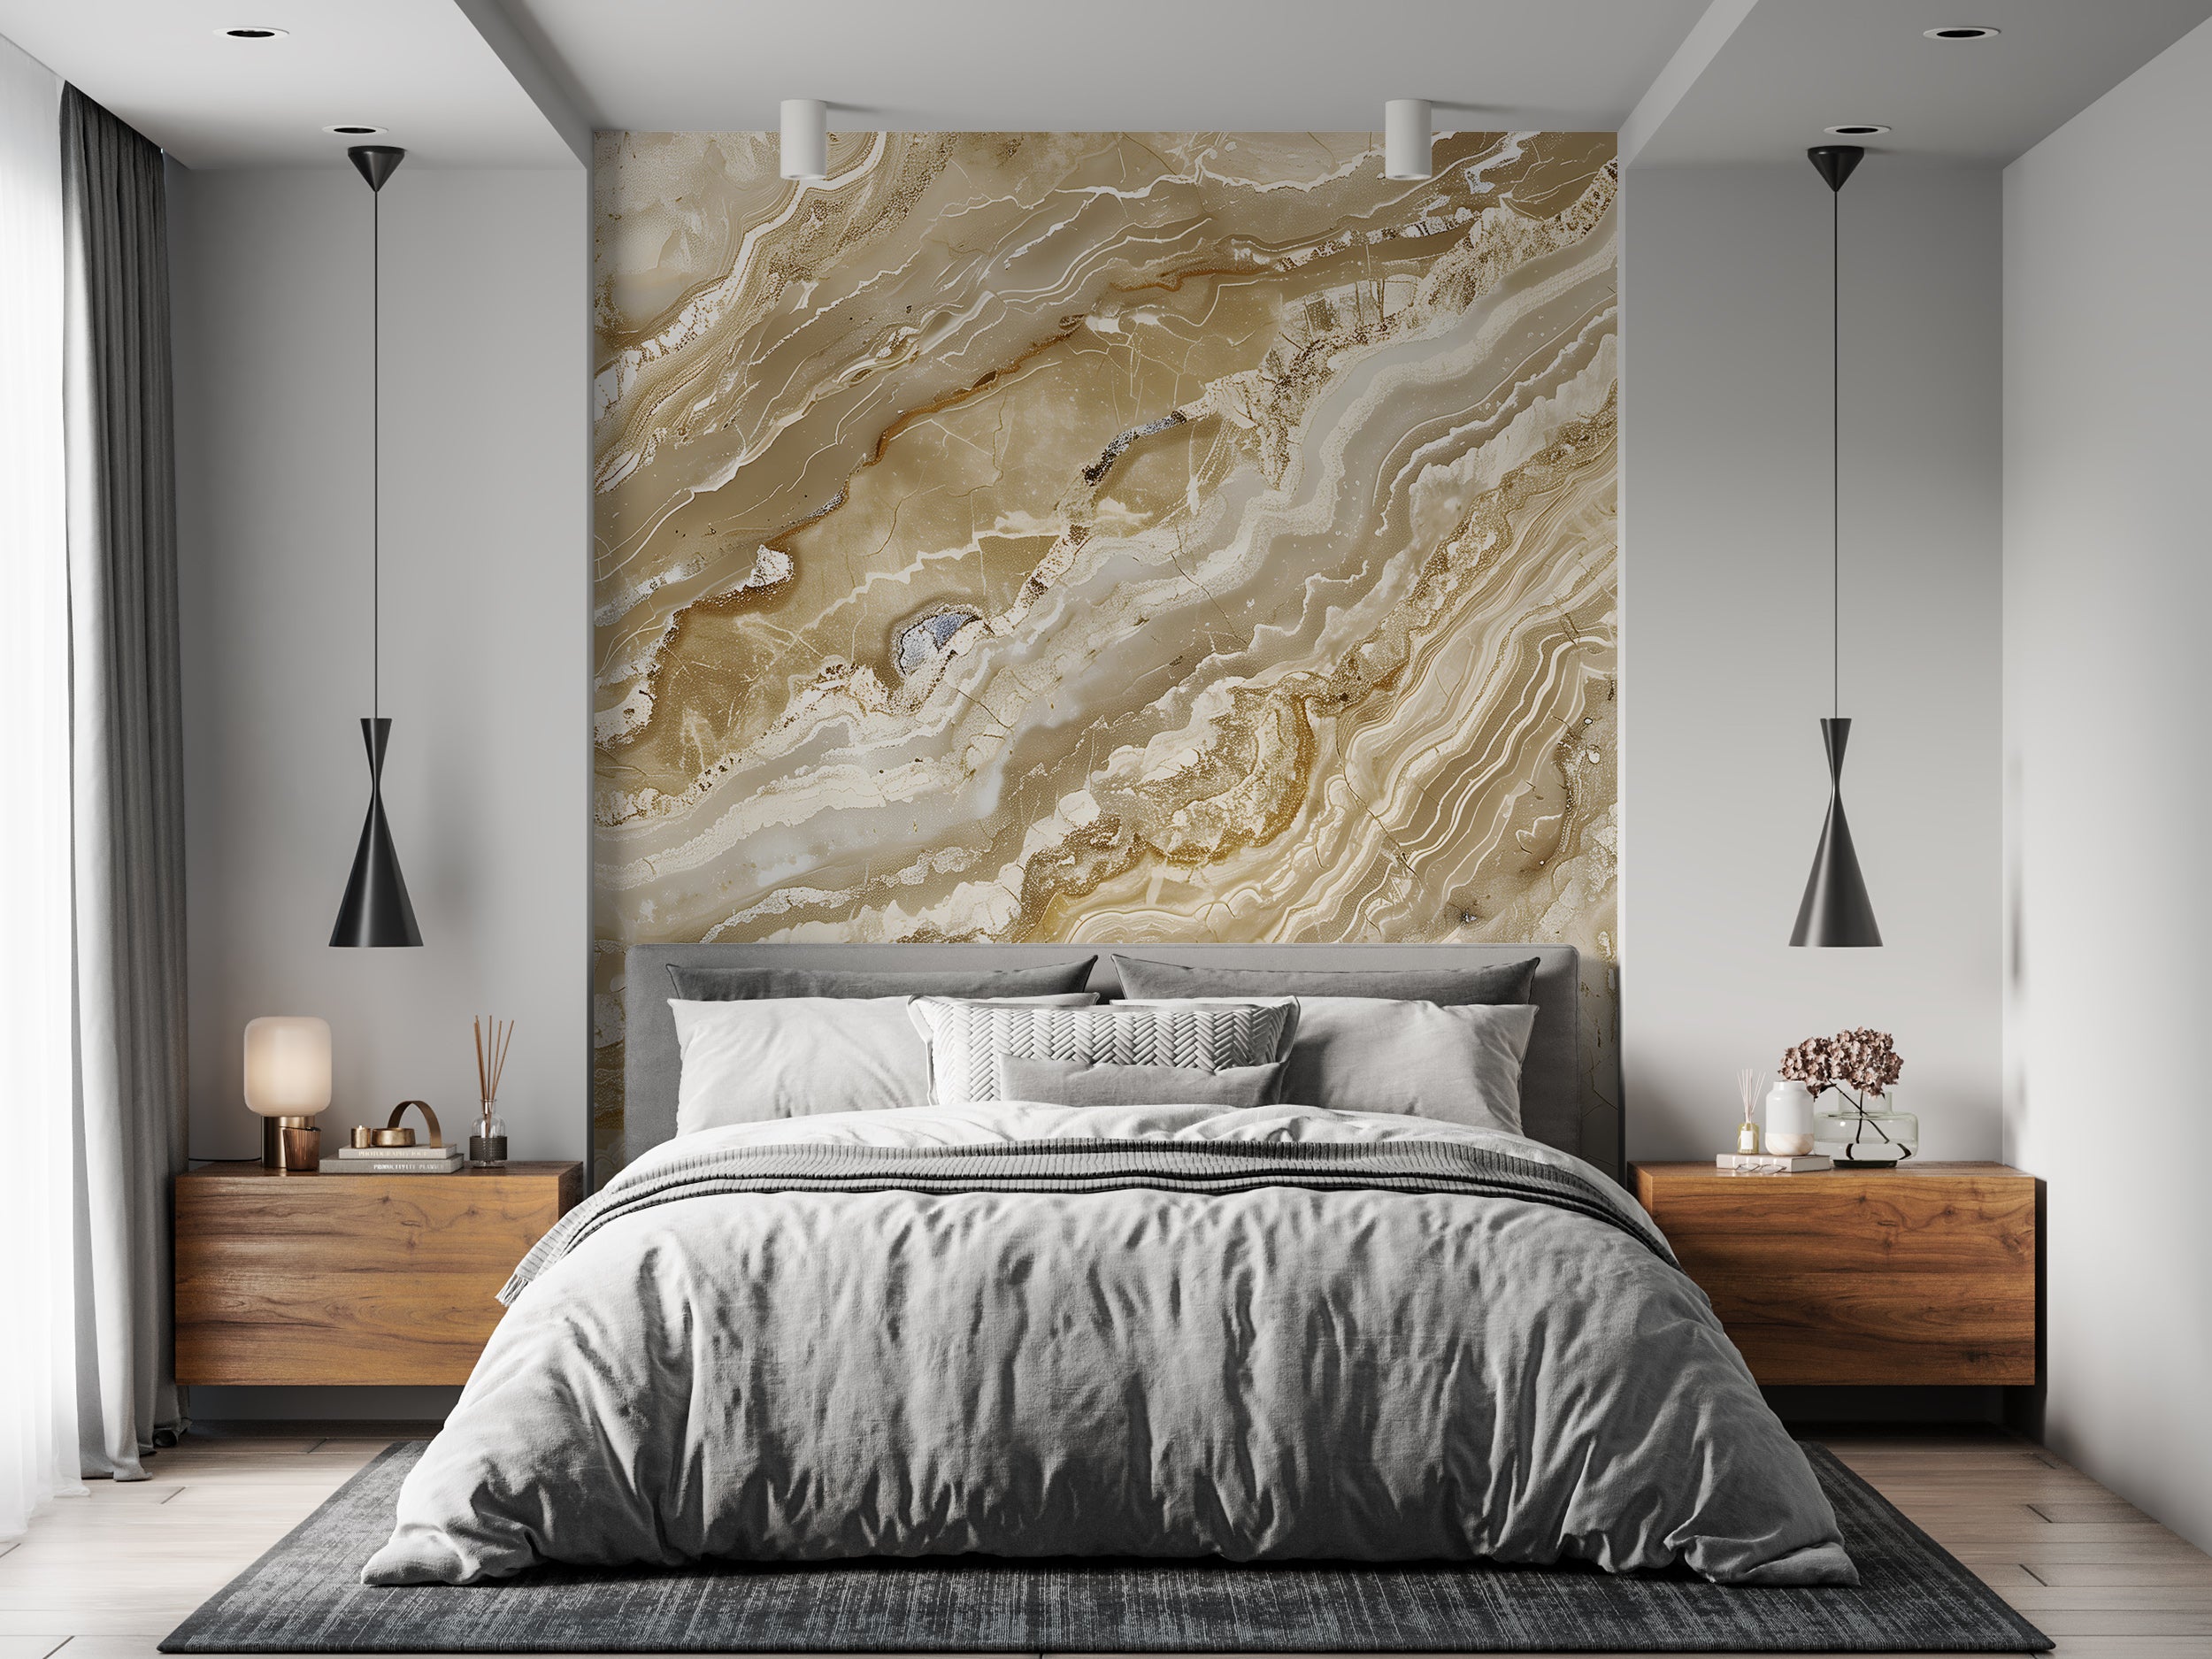 Marble Wall Mural, Removable Marble Wallpaper, Detailed Marble Texture Accent Wall Decor, Peel and Stick Beige Stone Wall Art, Custom Size